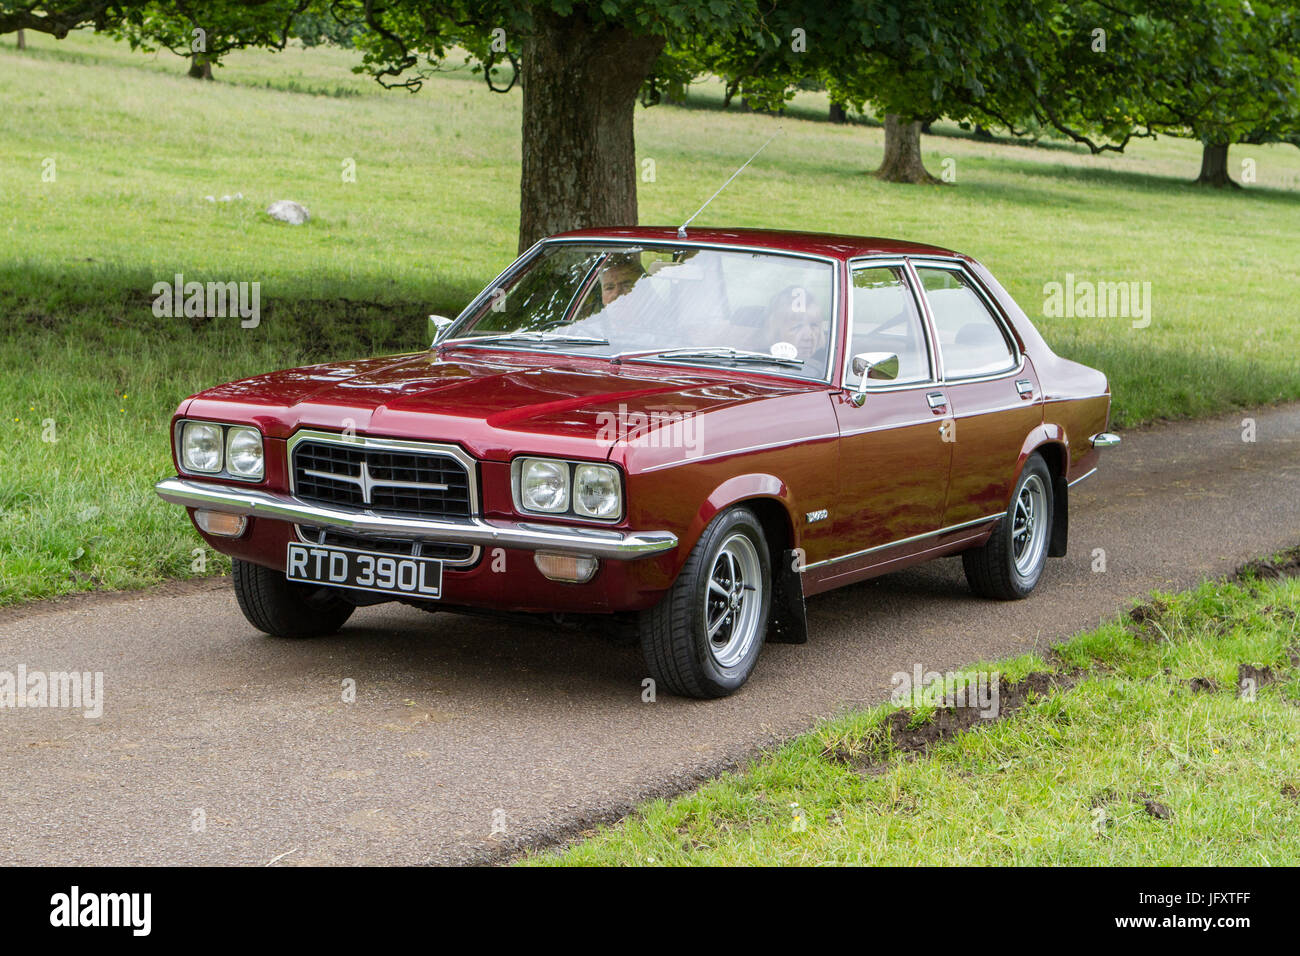 RTD390L red Vauxhall Victor Mark Woodward Classic Events, 400 classic cars, vintage vehicles. Stock Photo